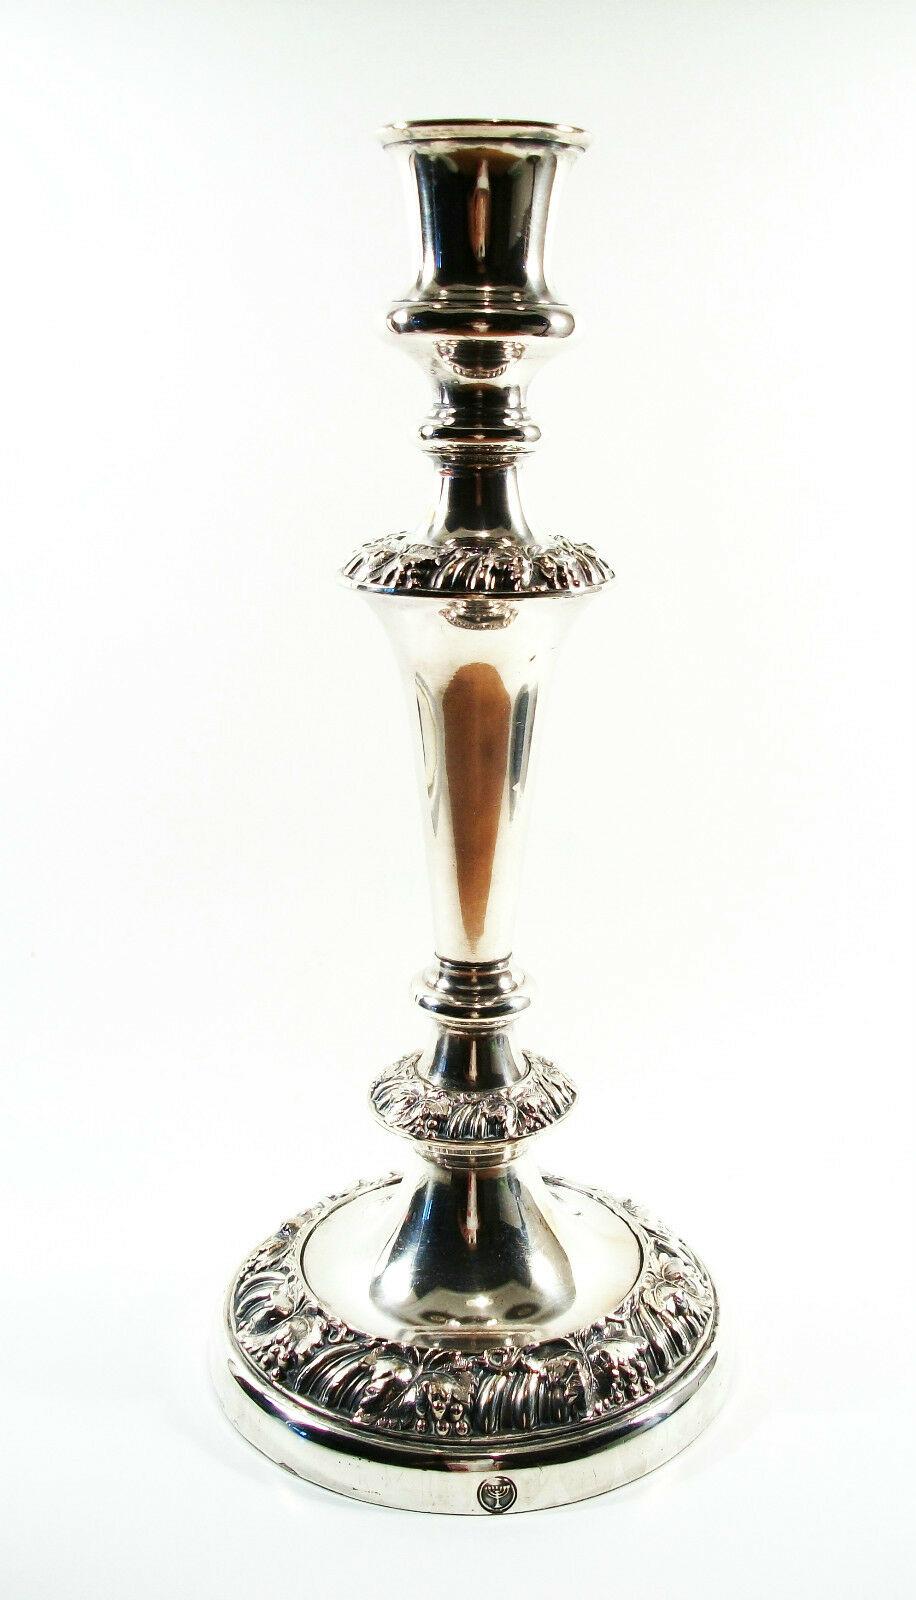 Ellis Barker Silver Co. - antique single silver-plate candlestick - large size - finely chased - weighted base - menorah hallmark / stamp to the base rim - Birmingham / England / U.K. - early 20th century.

Excellent antique condition - tarnishing